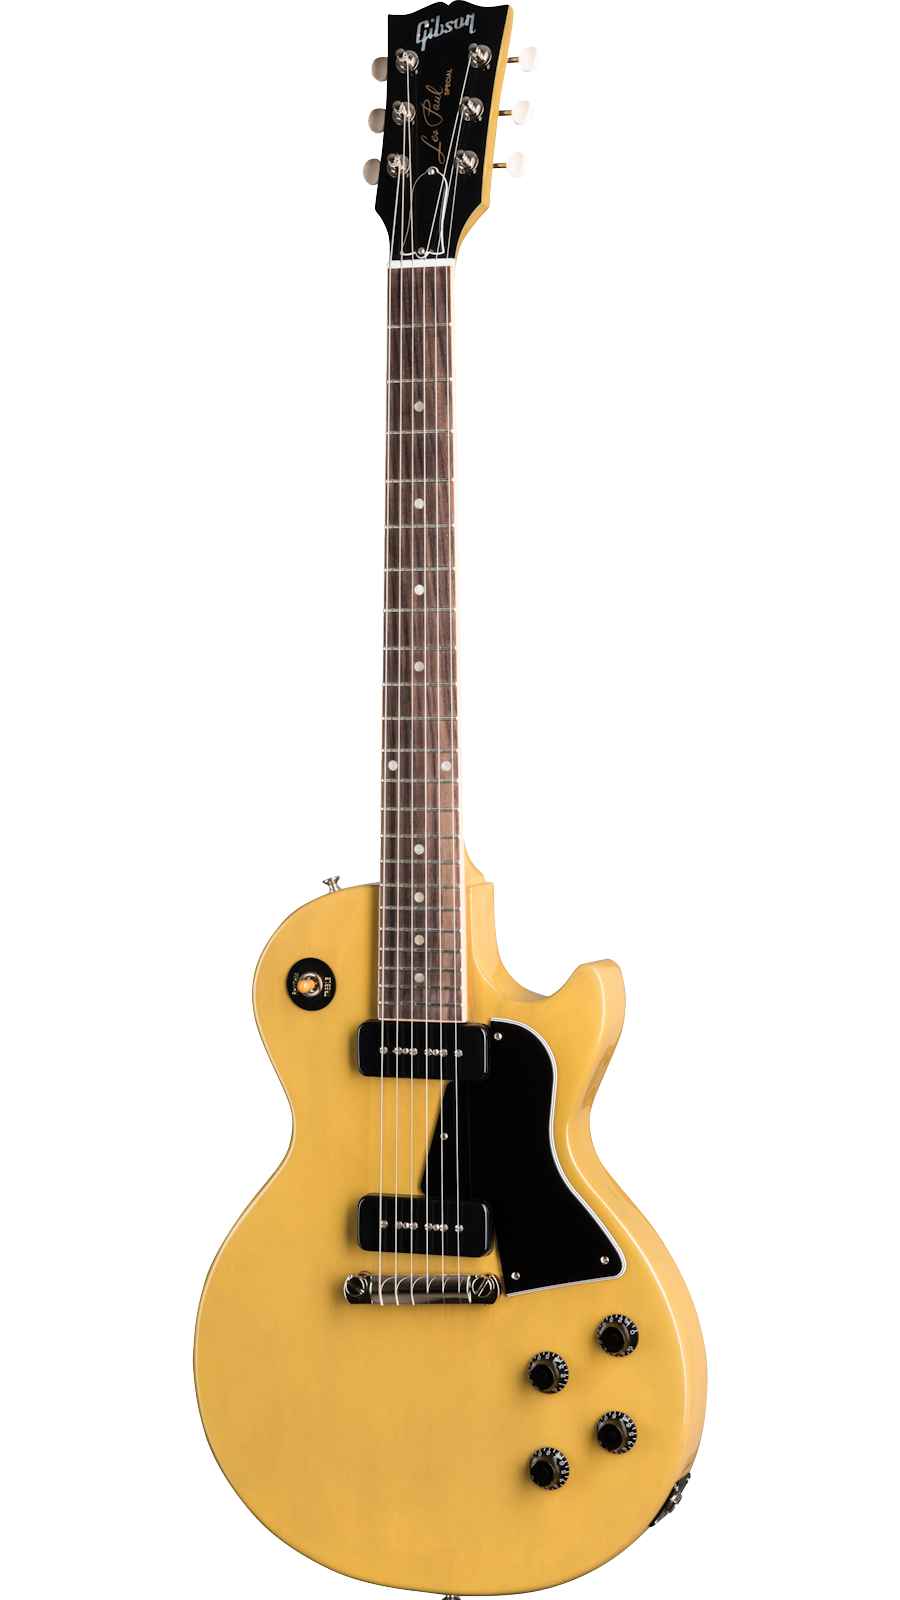 Gibson Les Paul Special electric guitar in TV Yellow Tone Shop Guitars DFW Texas